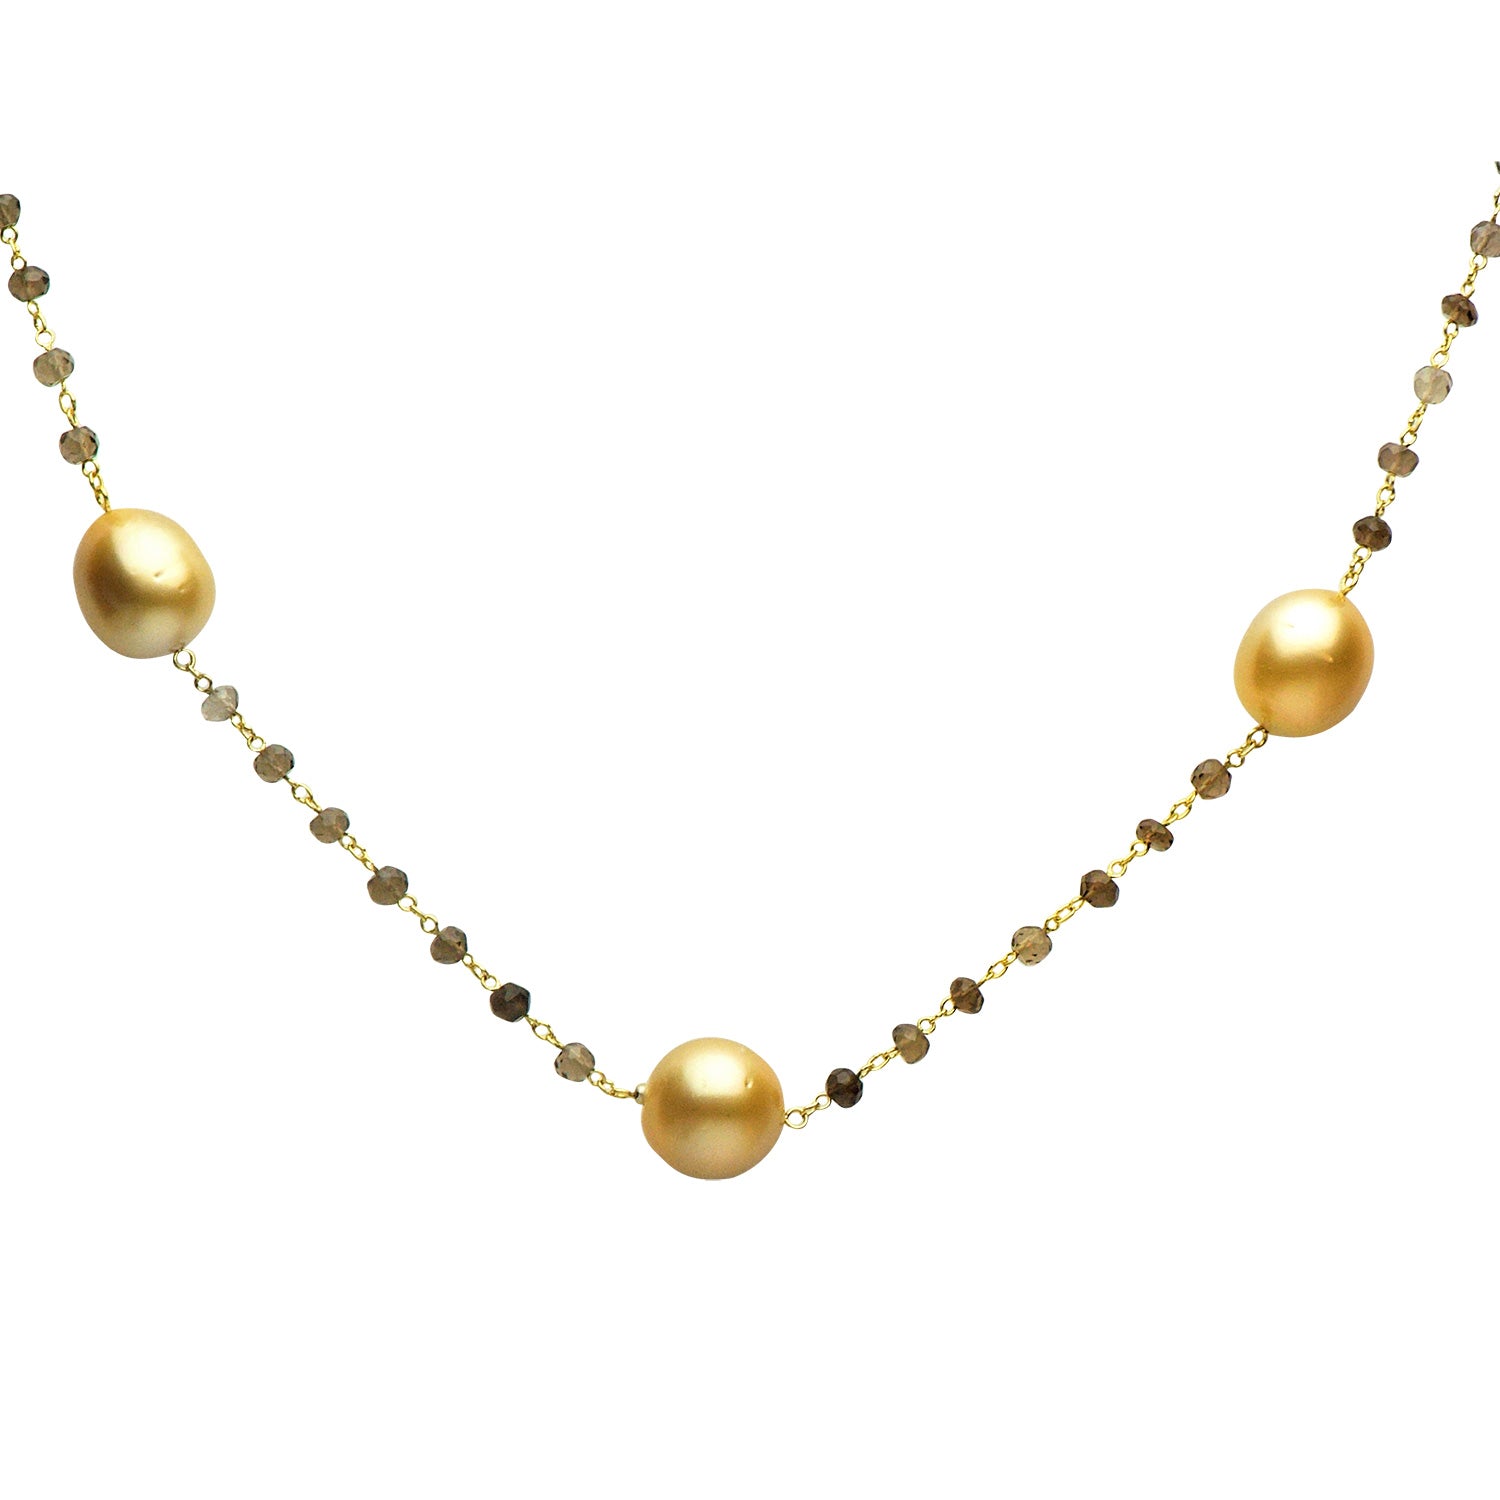 18KY Golden South Sea Pearl Tincup, 13-14mm